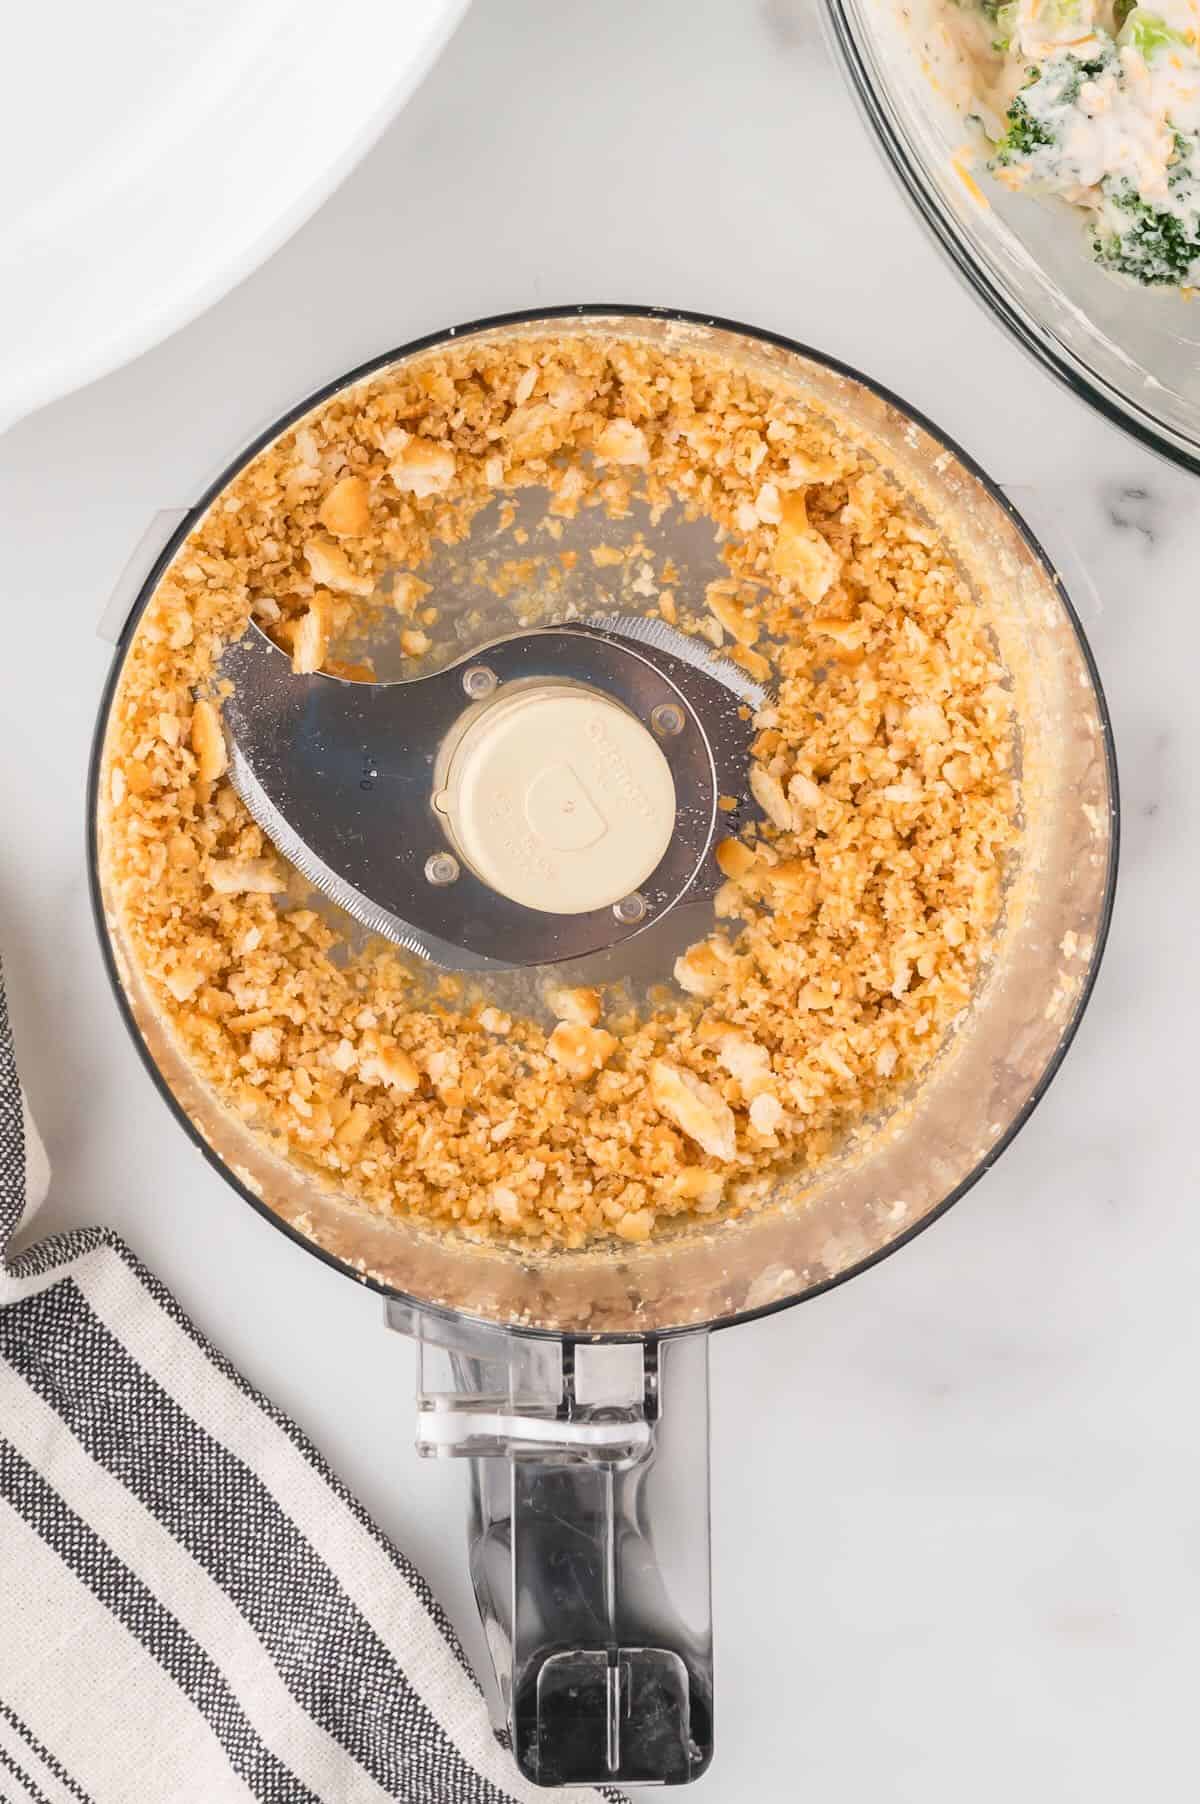 Ritz crackers in a food processor are being crushed. 